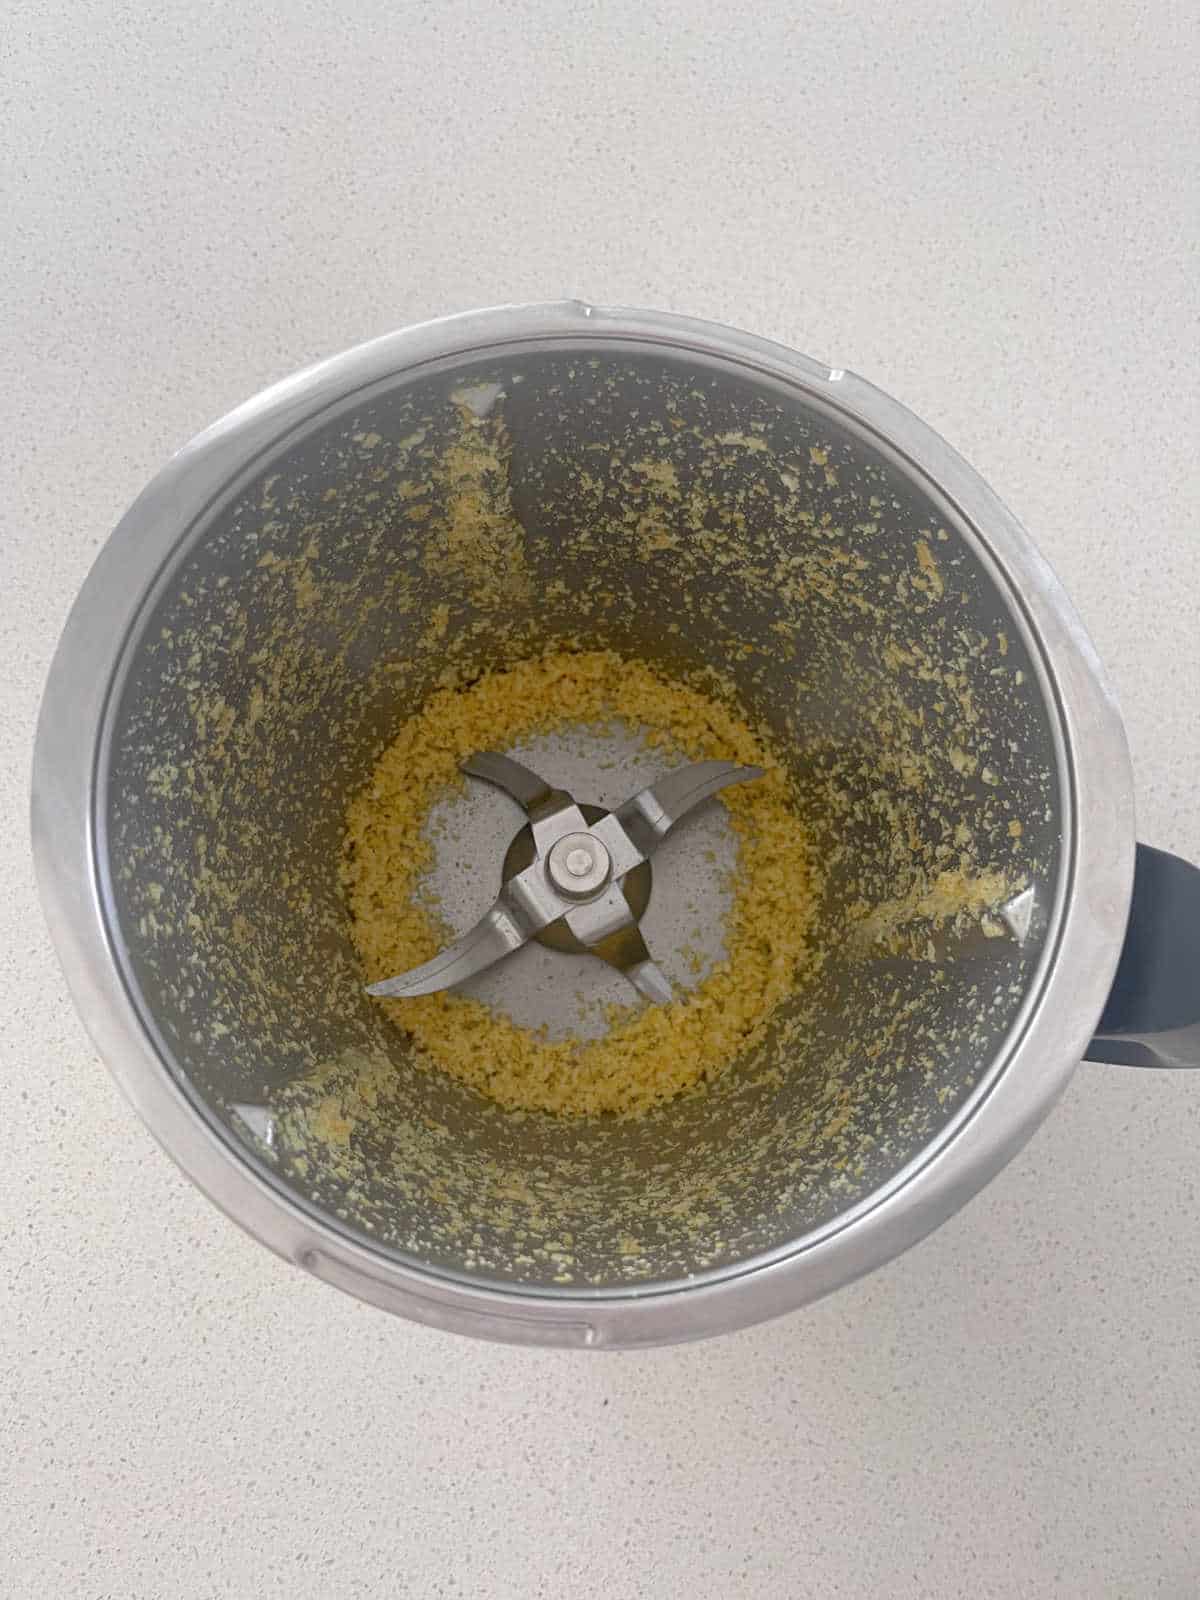 Lemon Zest in a Thermomix bowl.